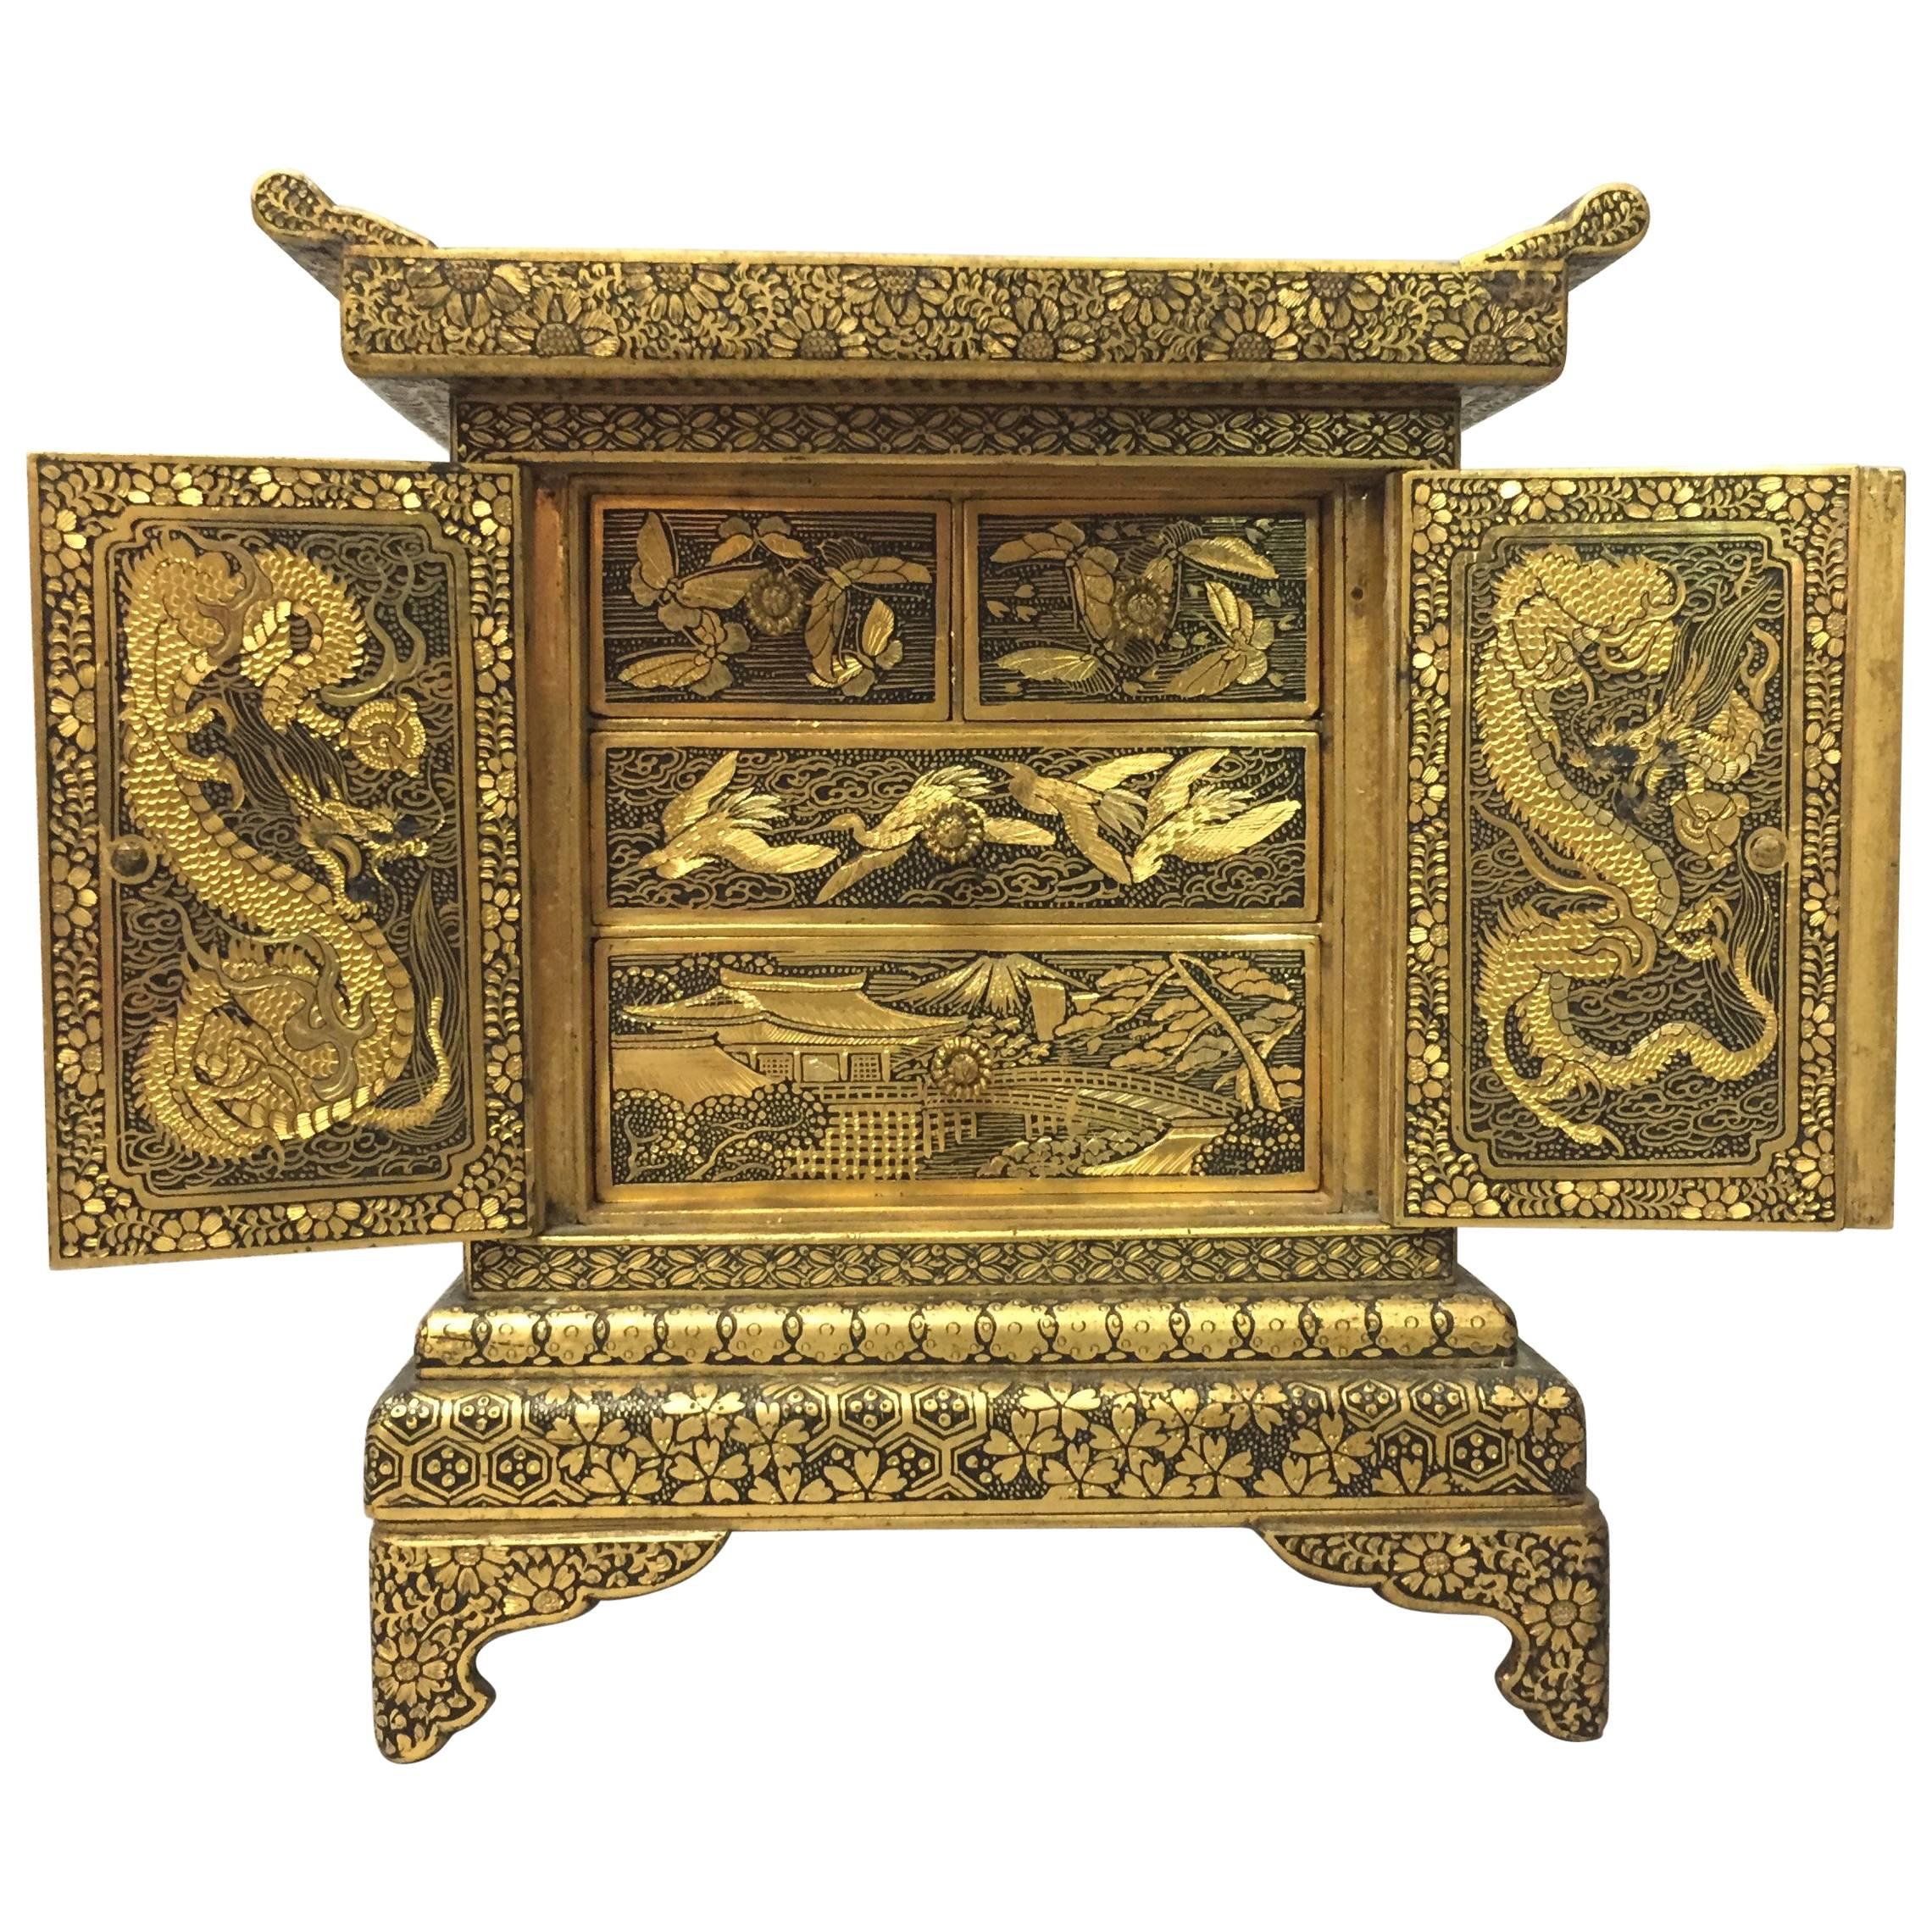 19th Century Japanese Bronze Box with Gold Decoration